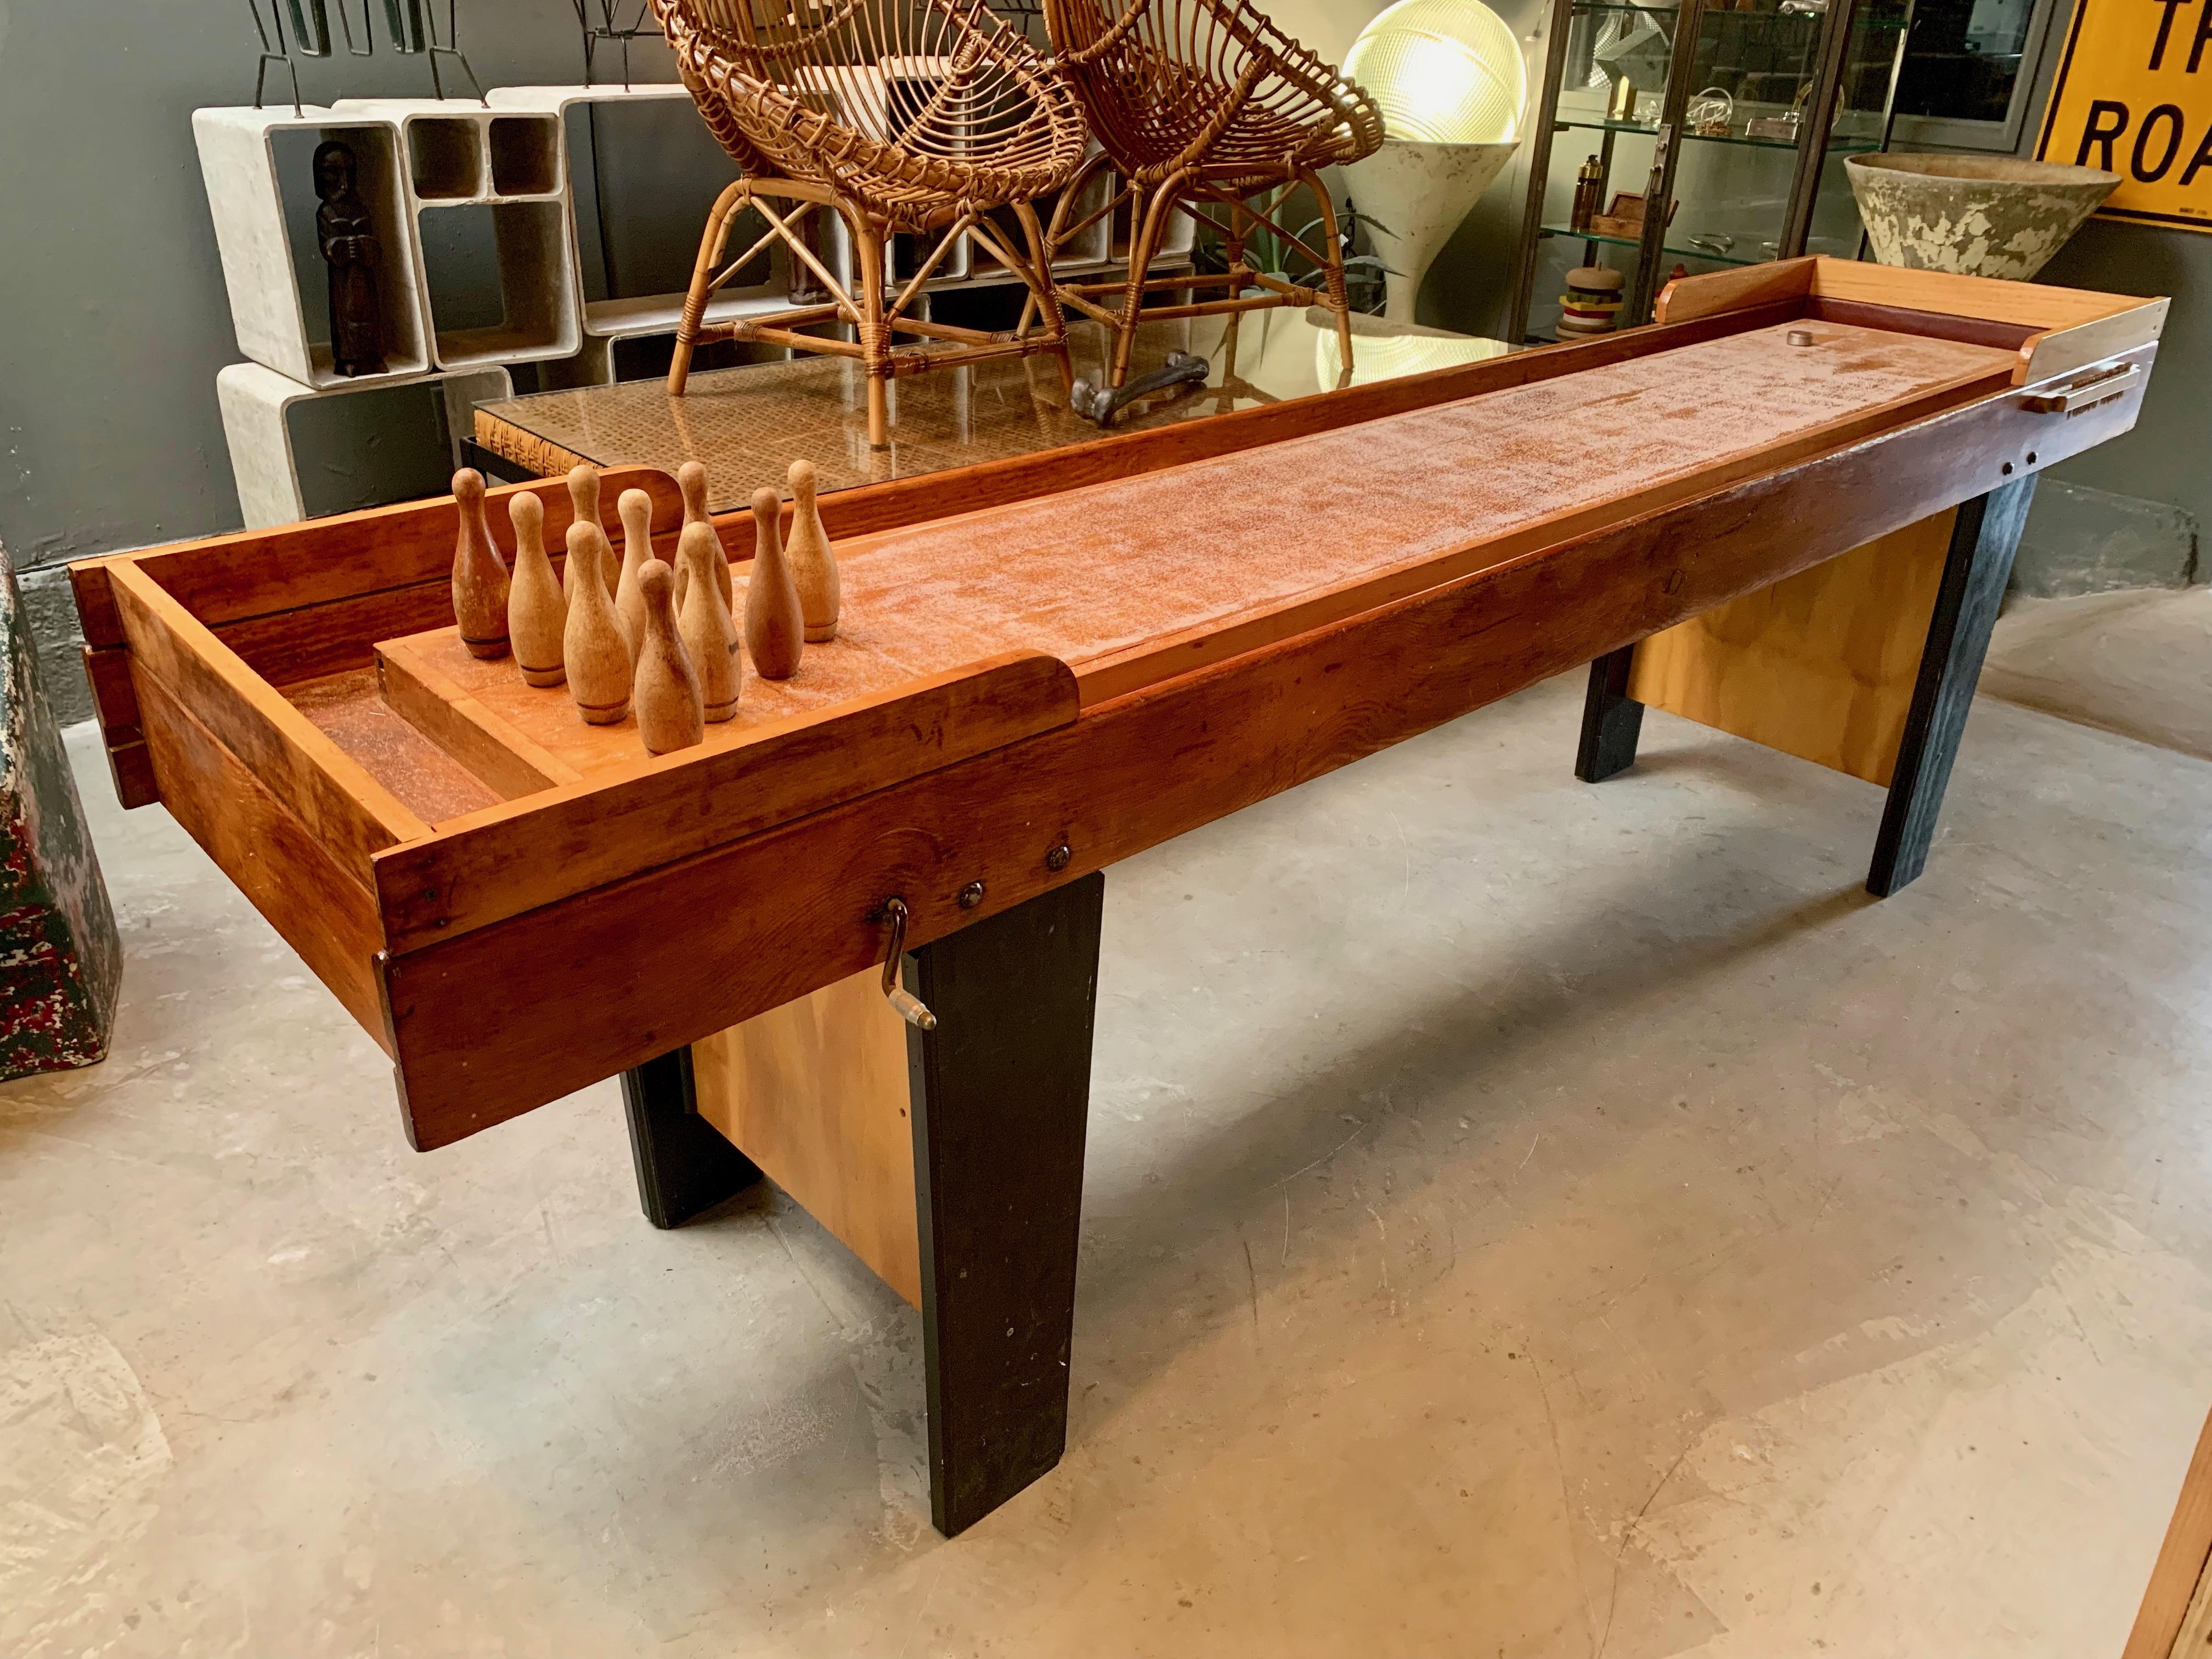 Cool vintage shuffleboard bowling table. Great lines and detail. Burgundy leather bumpers, wood pins and two-tone wood coloring. Interesting handle with manual mechanism that knocks over the remaining pins from underneath. Metal pucks included as